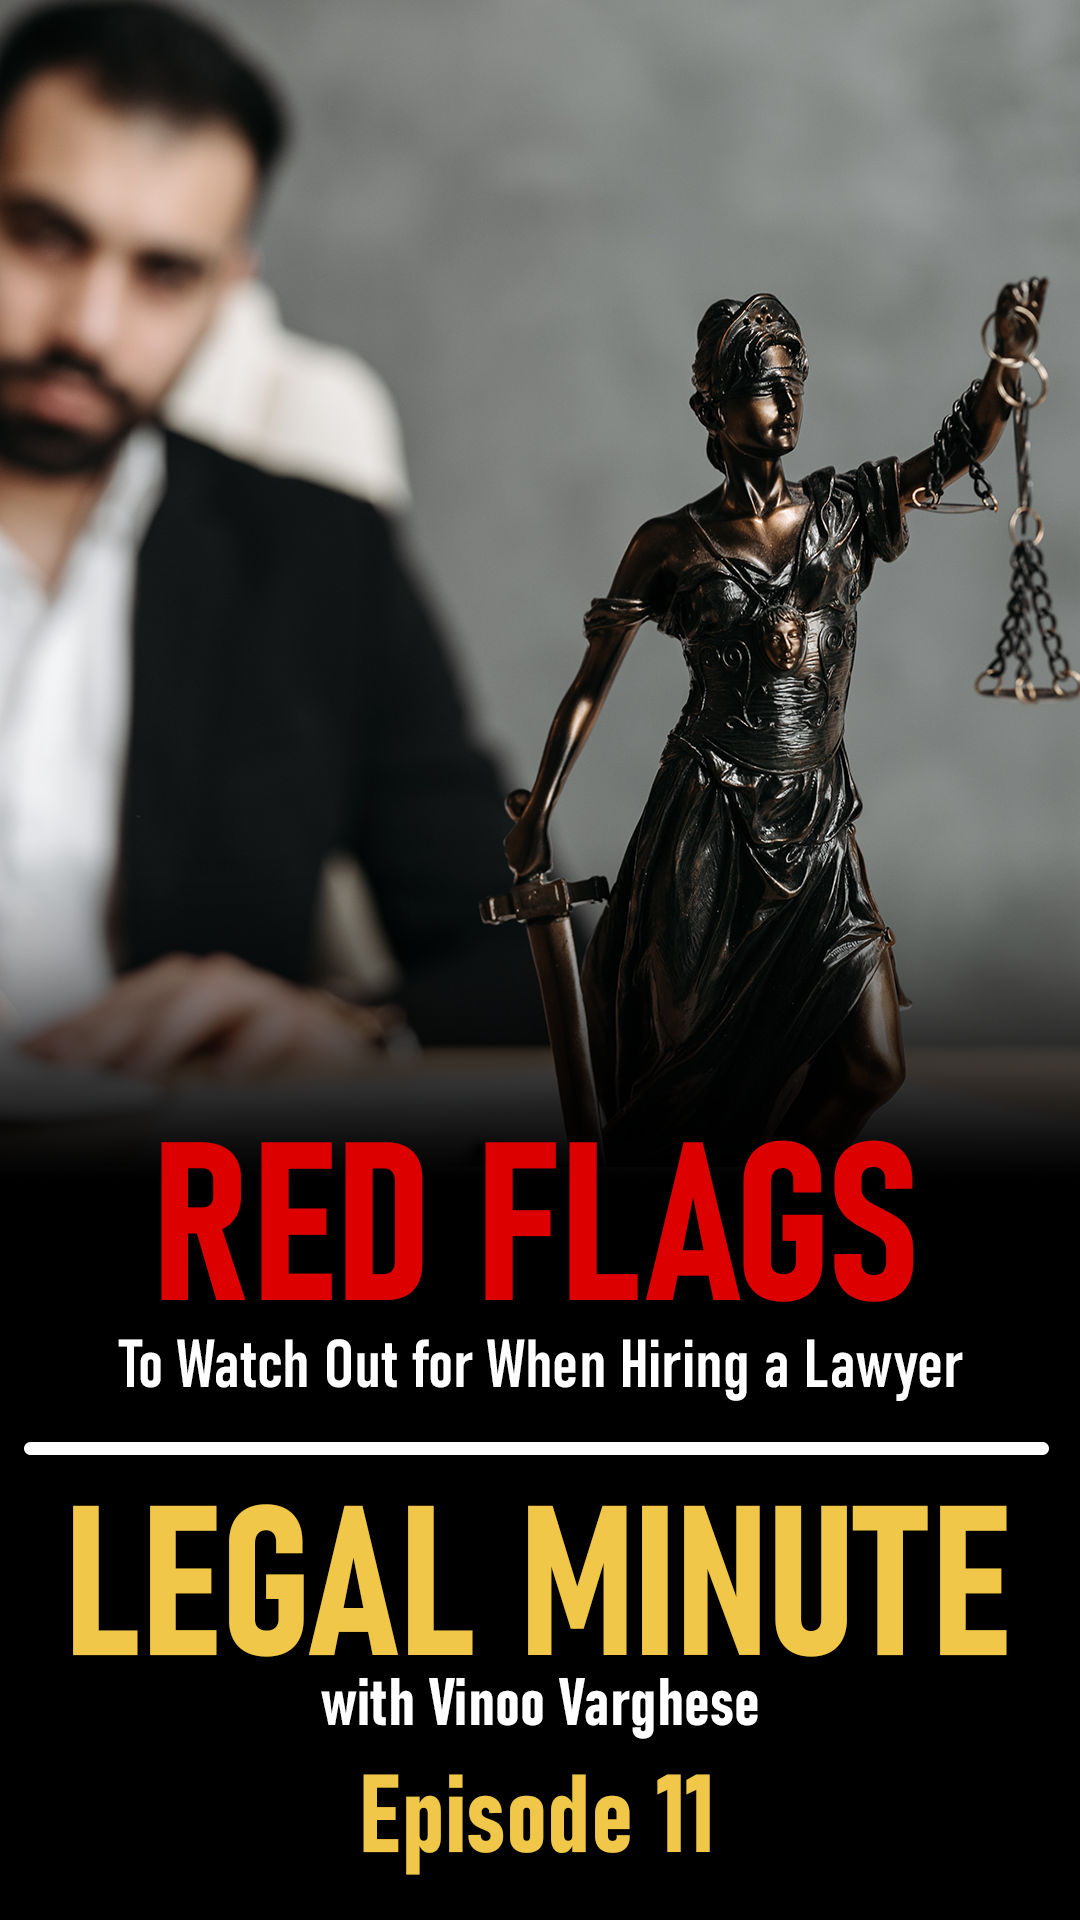 Red Flags to watch out for when looking for a lawyer